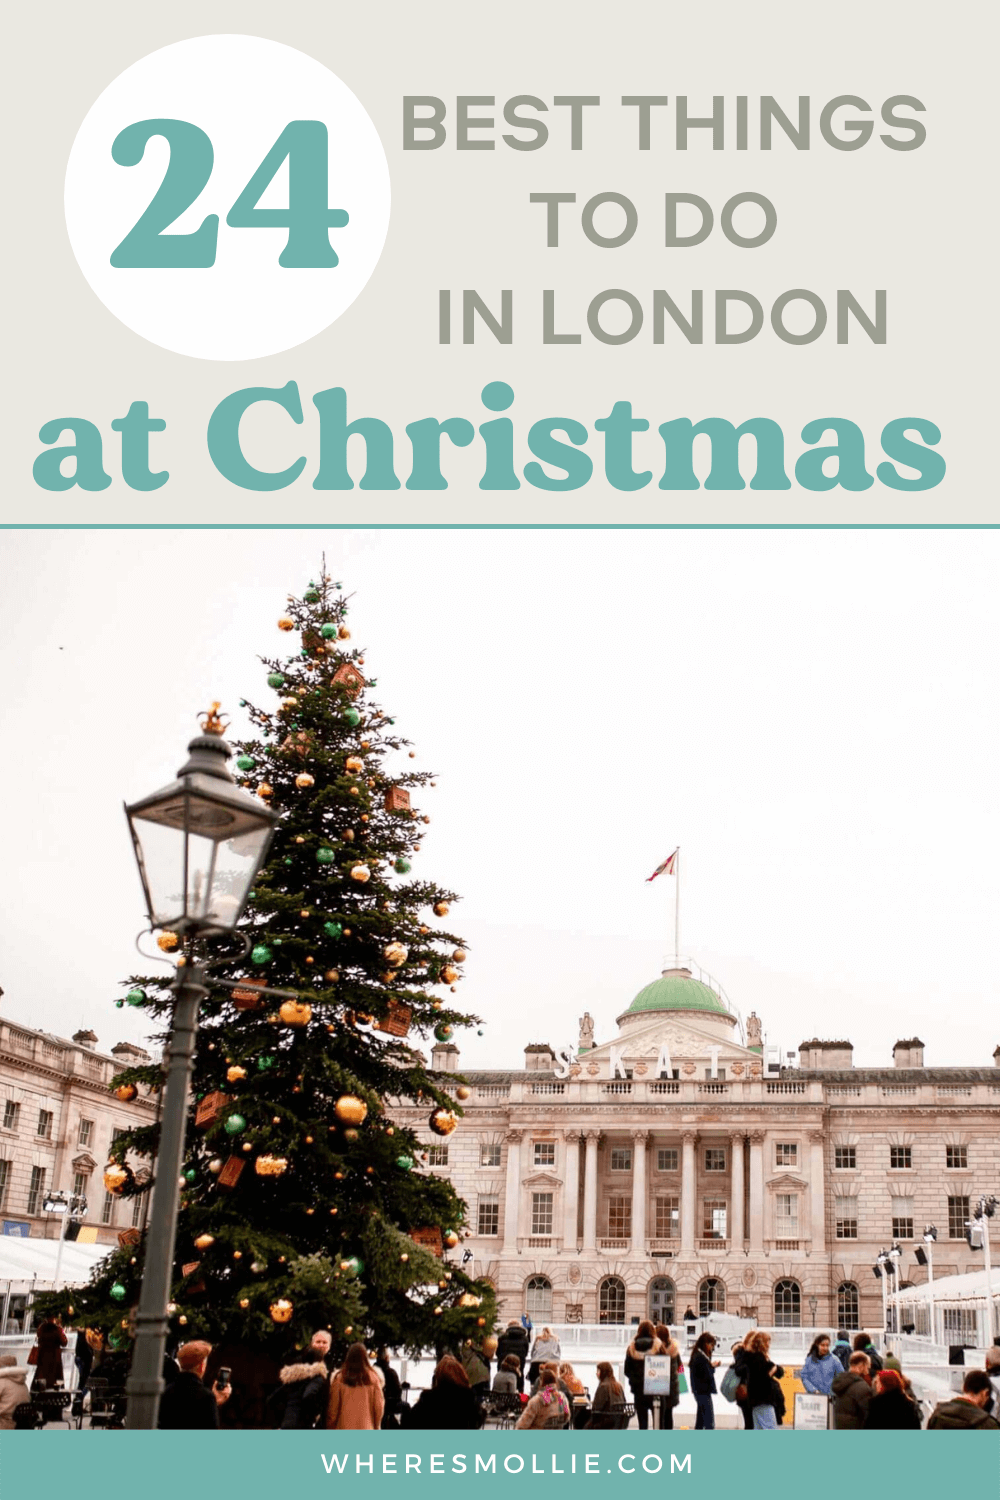 24 best things to do in London at Christmas